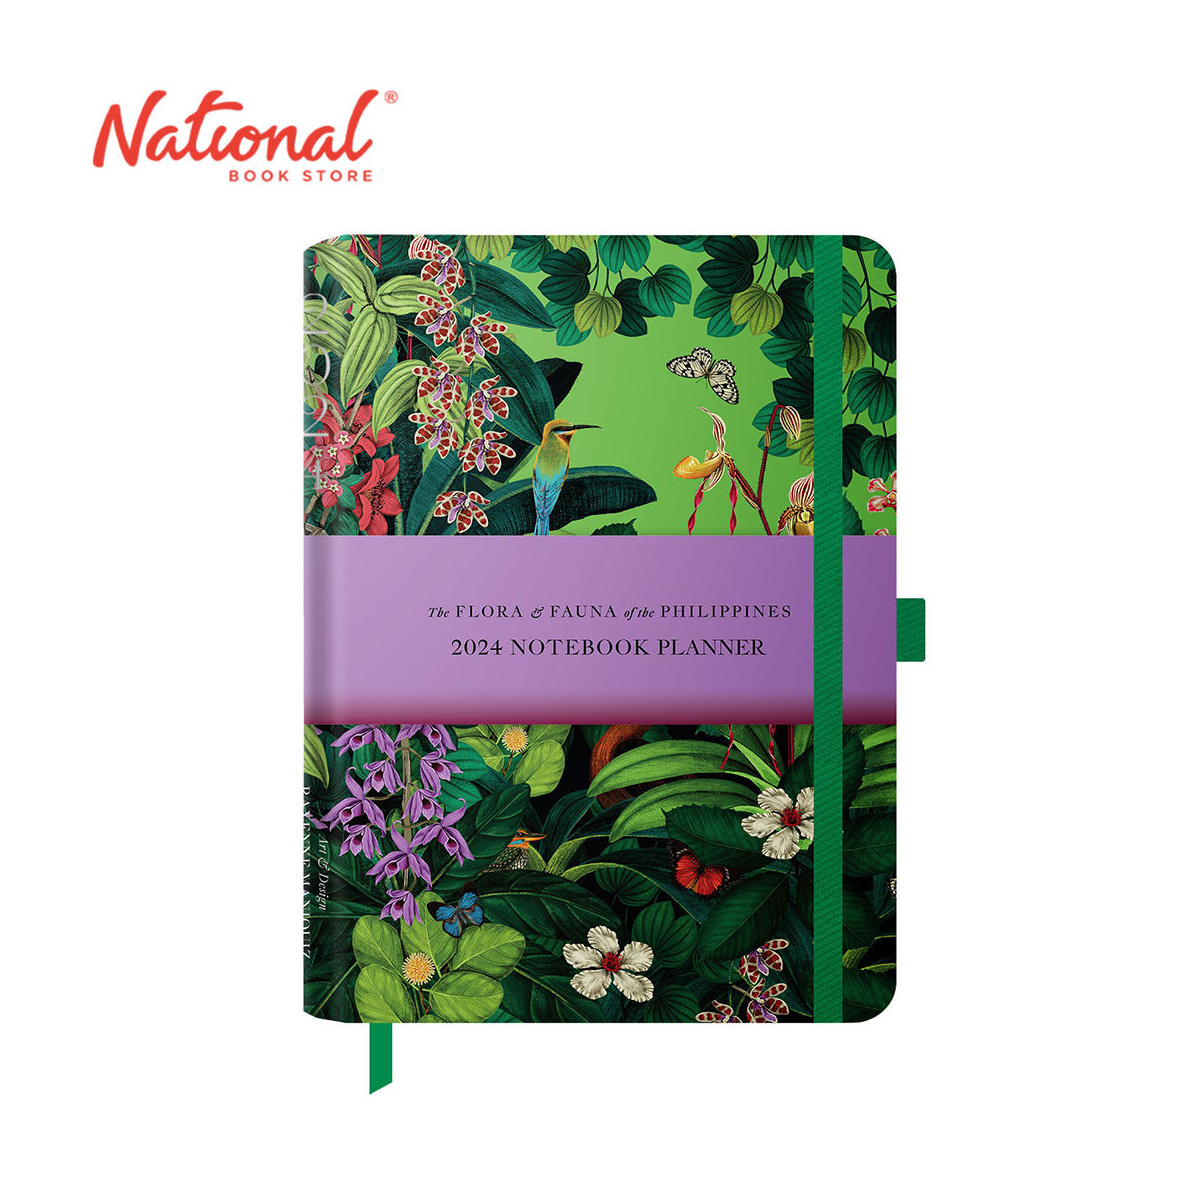 2024 Notebook Planner A5 The Flora & Fauna of the Philippines - School & Office Supplies